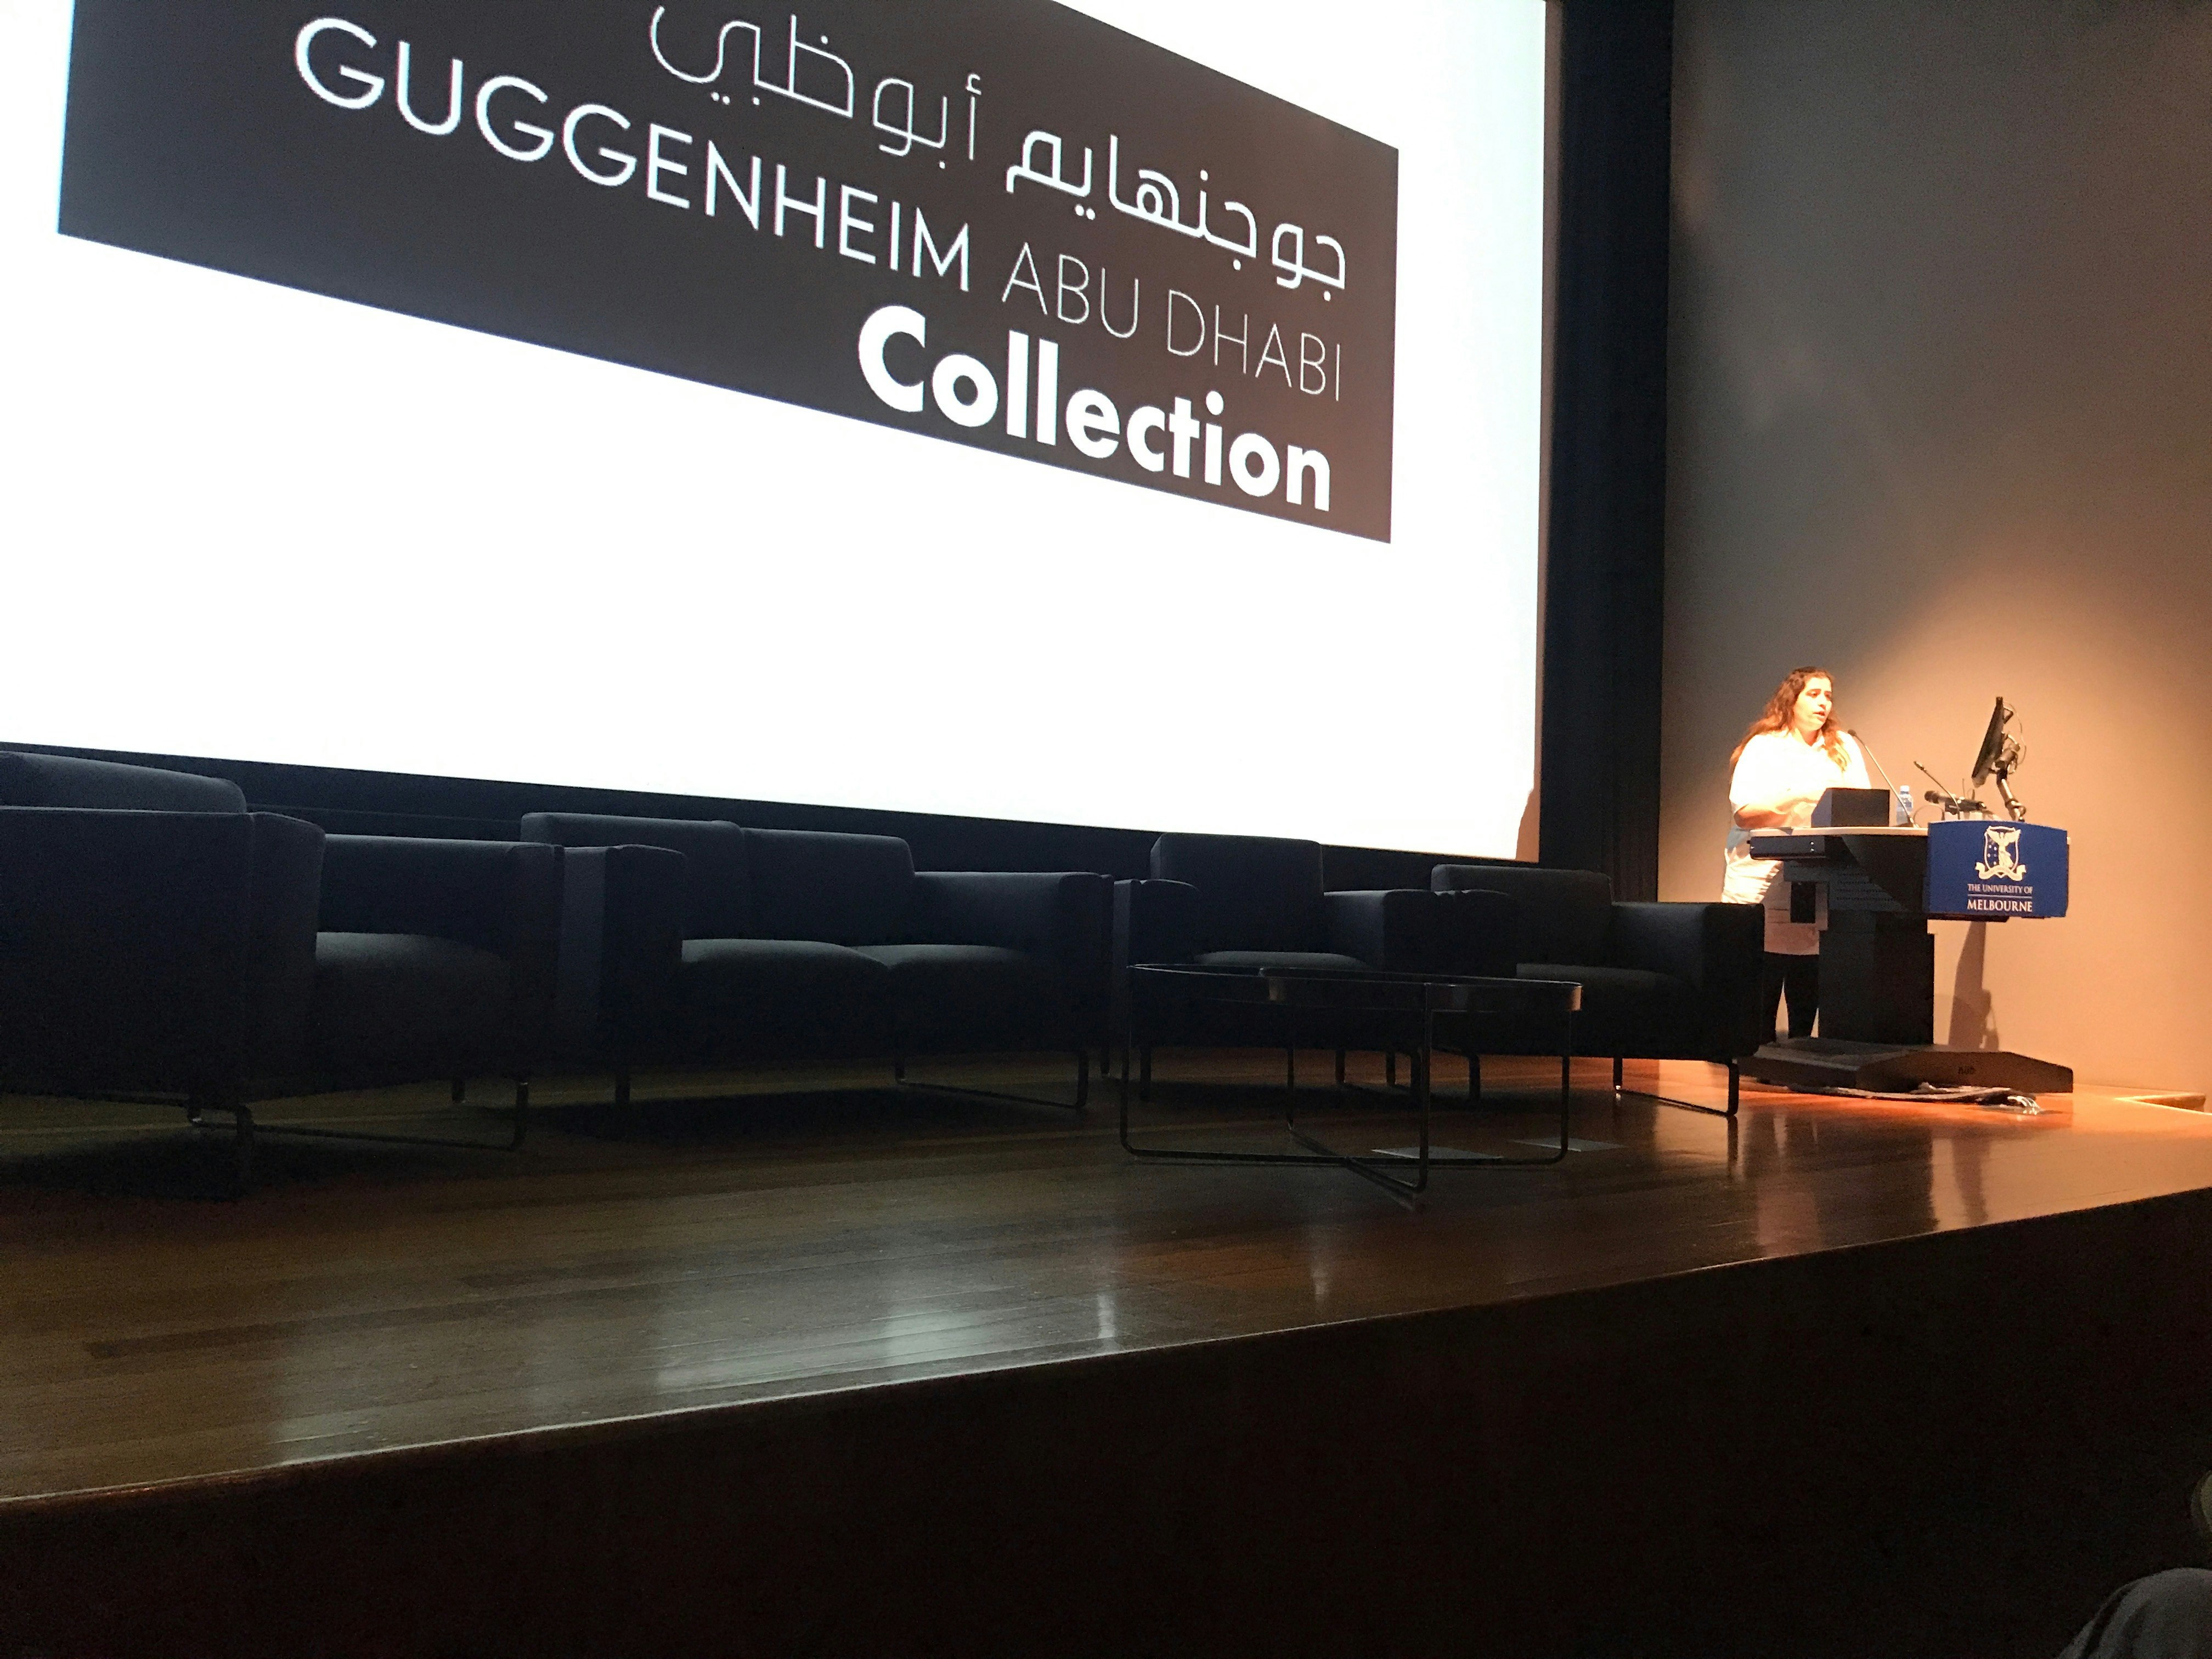 A Middle Eastern female-presenting figure stands at a podium decorated with The University of Melbourne insignia. Behind her is a large projector screen that reads: Guggenheim Abu Dhabi Collection.